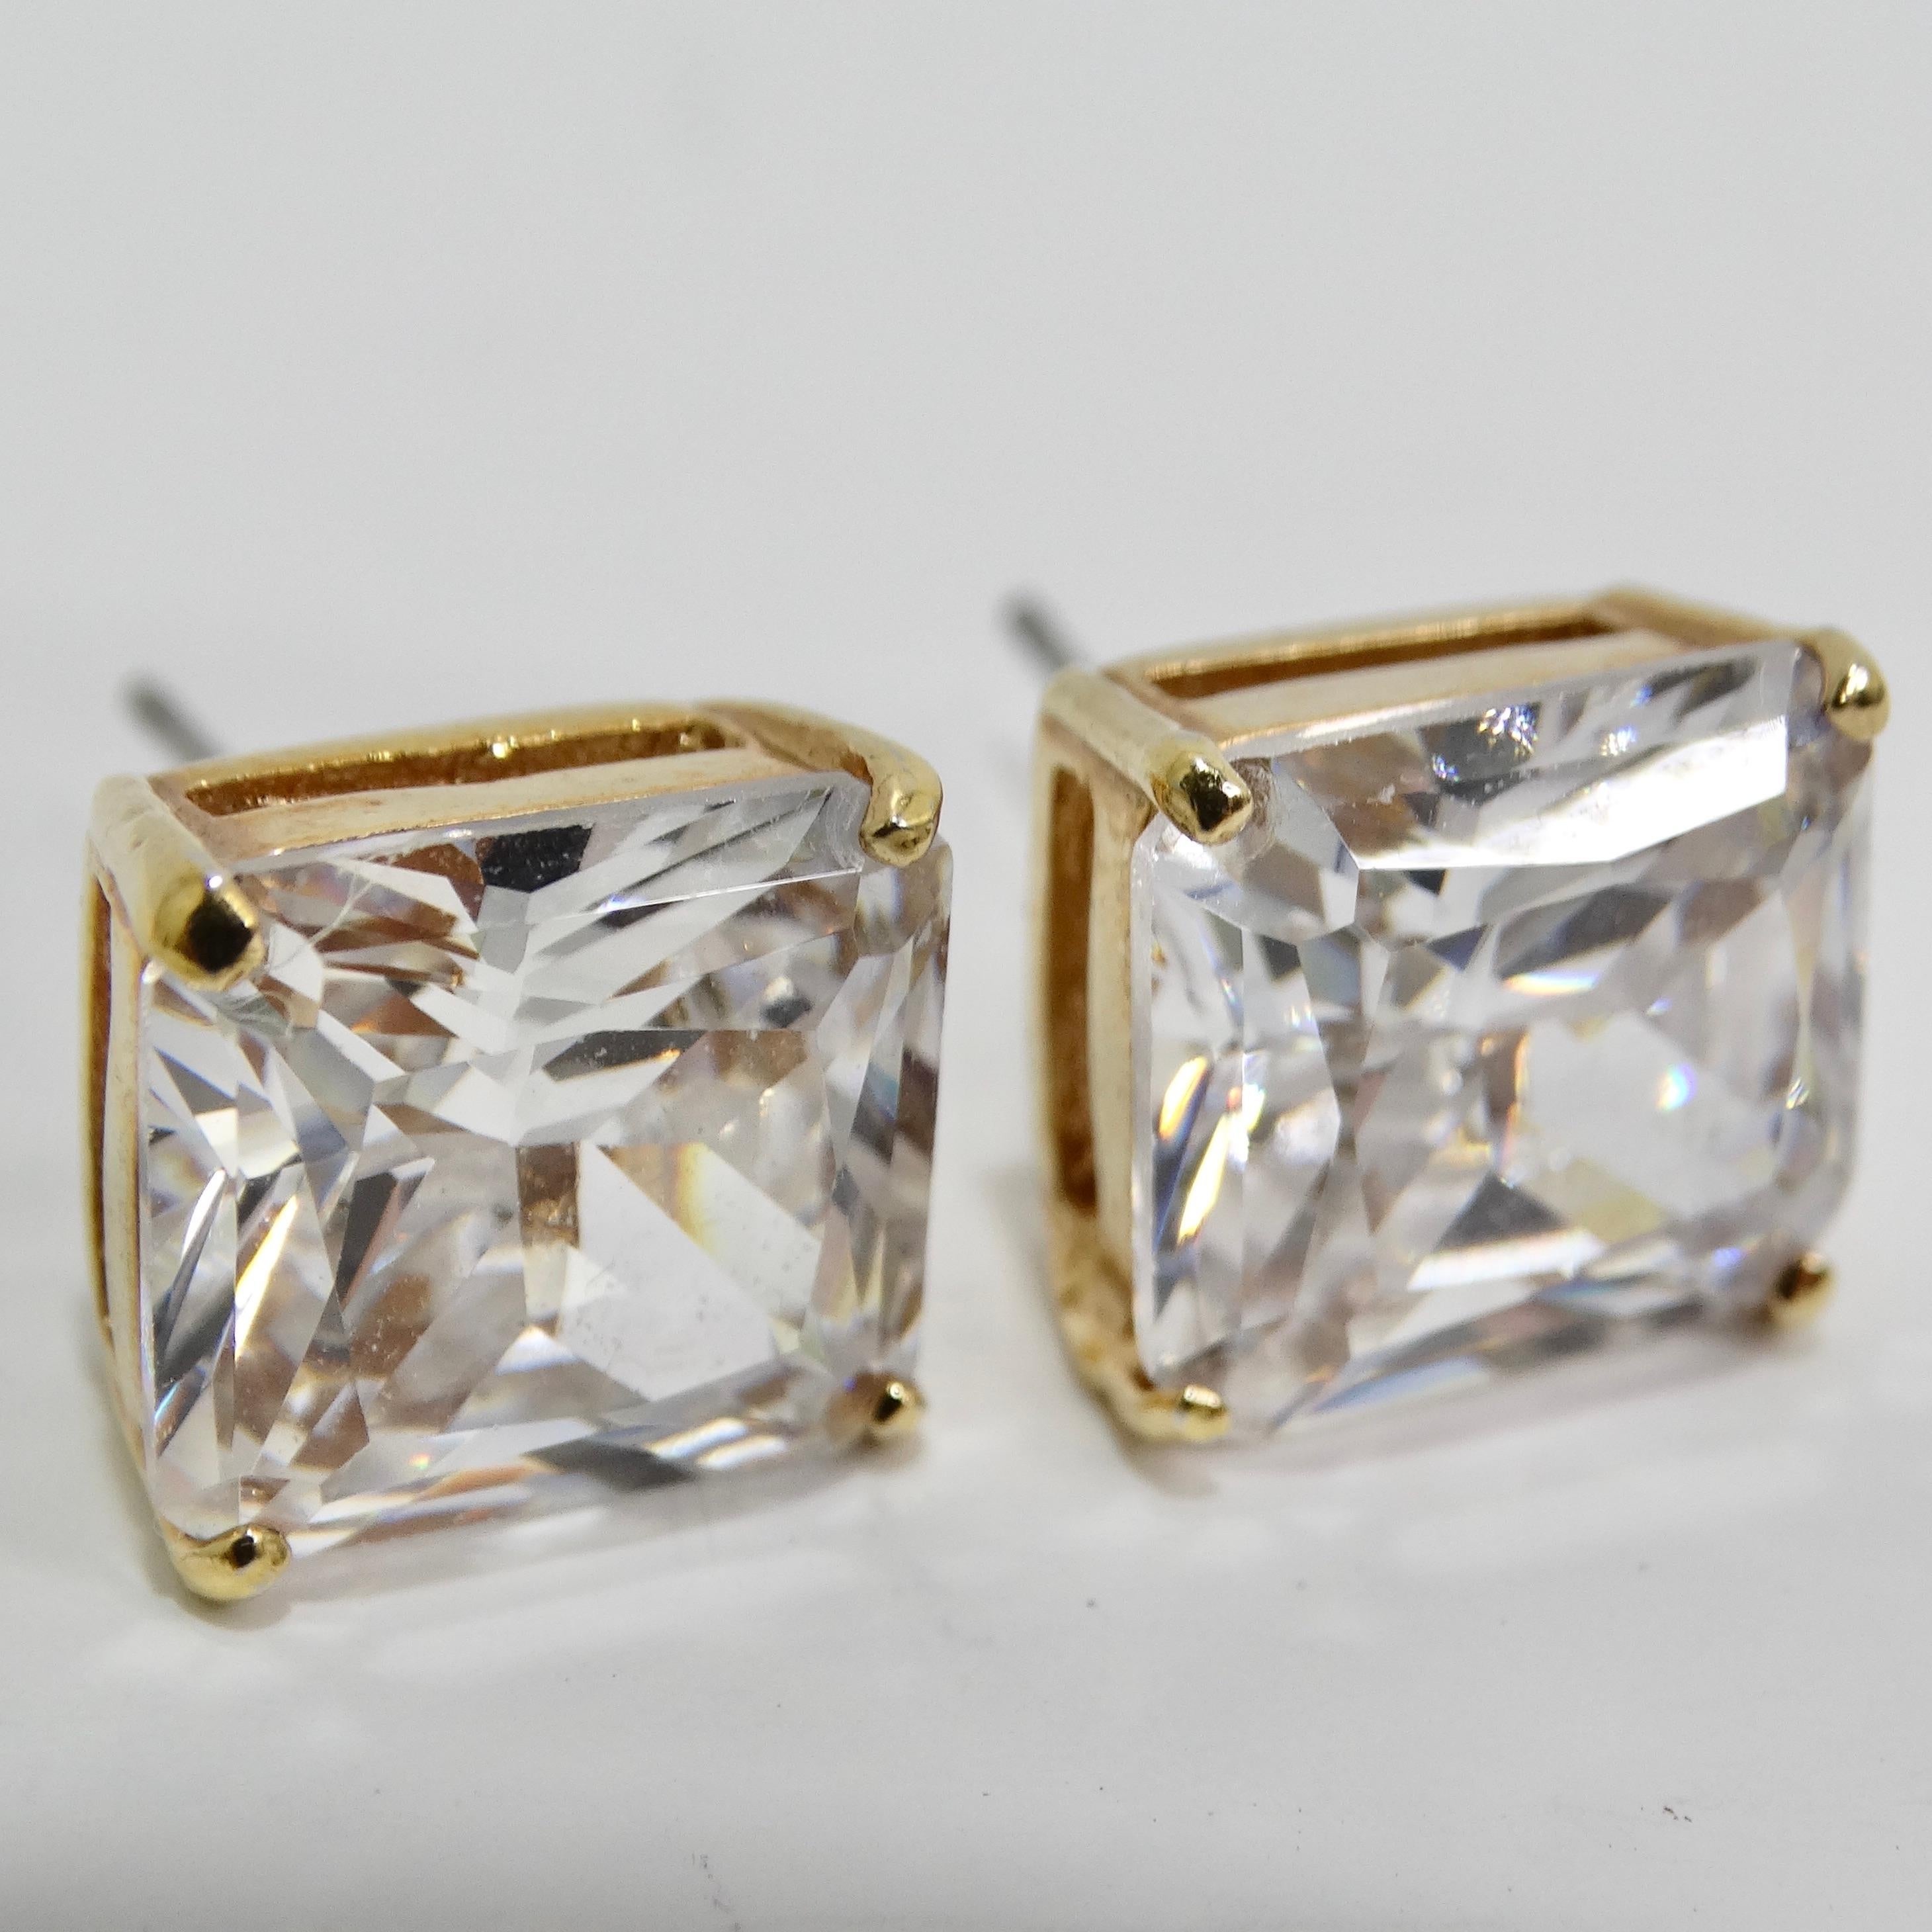 Introducing our stunning 18K Gold Plated Swarovski Synthetic Crystal Stud Earrings, a classic and versatile addition to your jewelry collection. Approximately 5 carats each! These timeless stud earrings feature Swarovski emerald-cut crystals in a